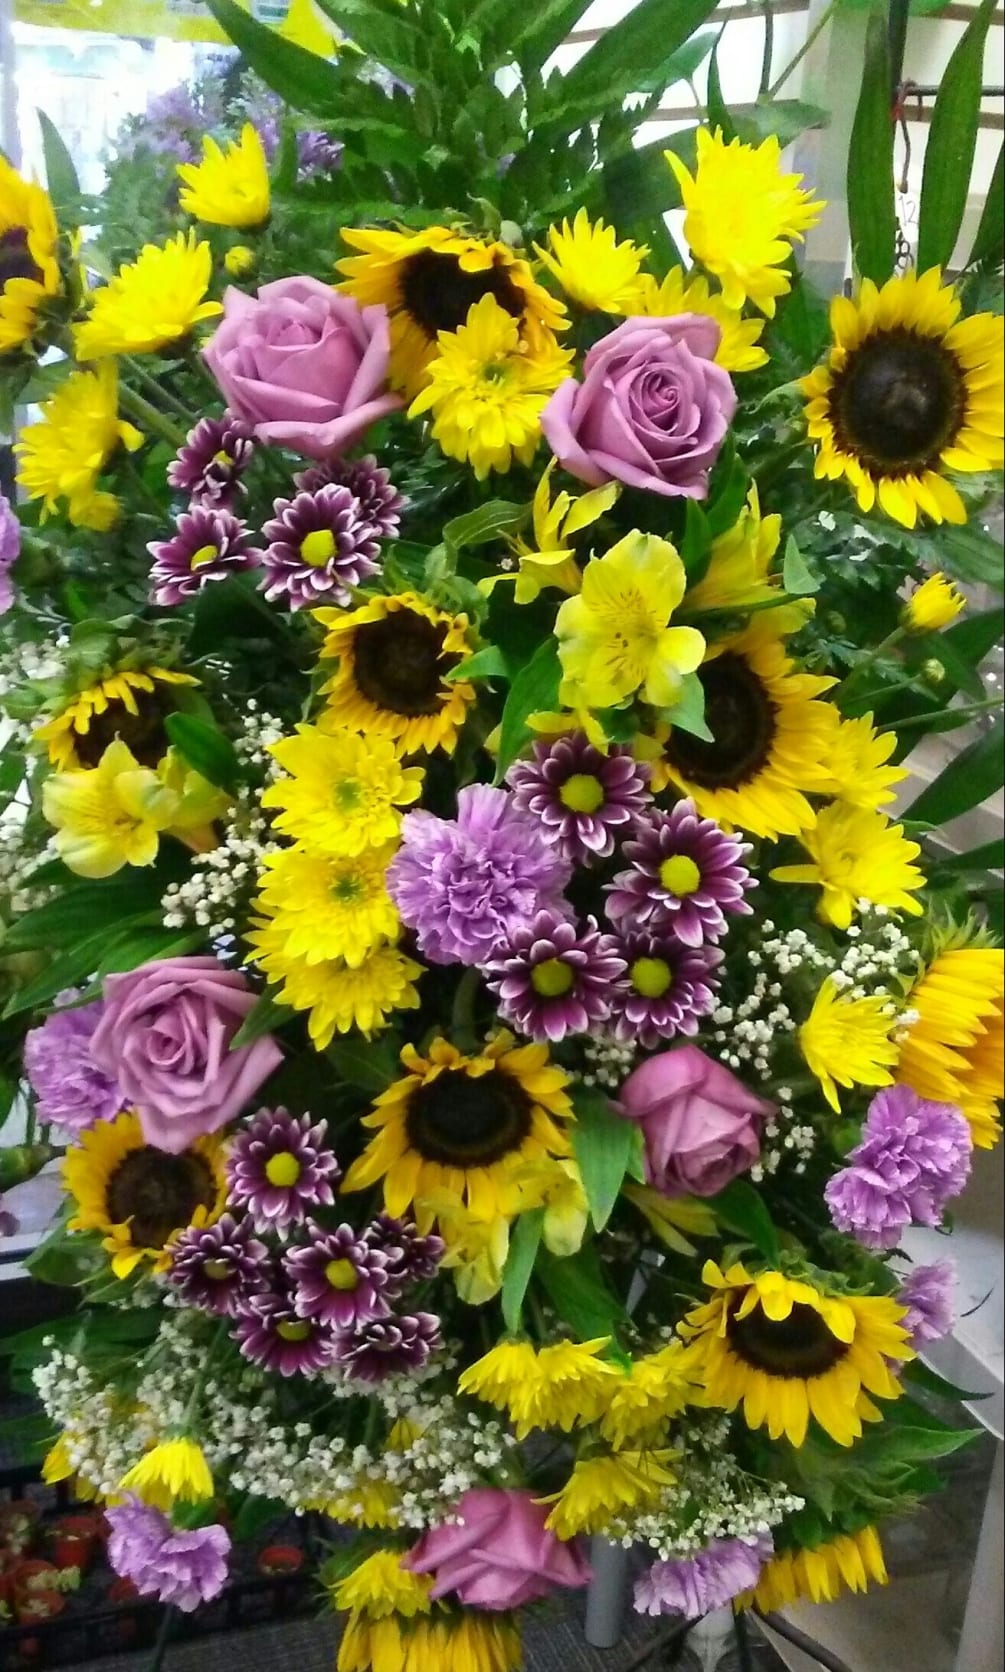 Includes sunflowers, roses, and more. It is a full, beautiful standing spray